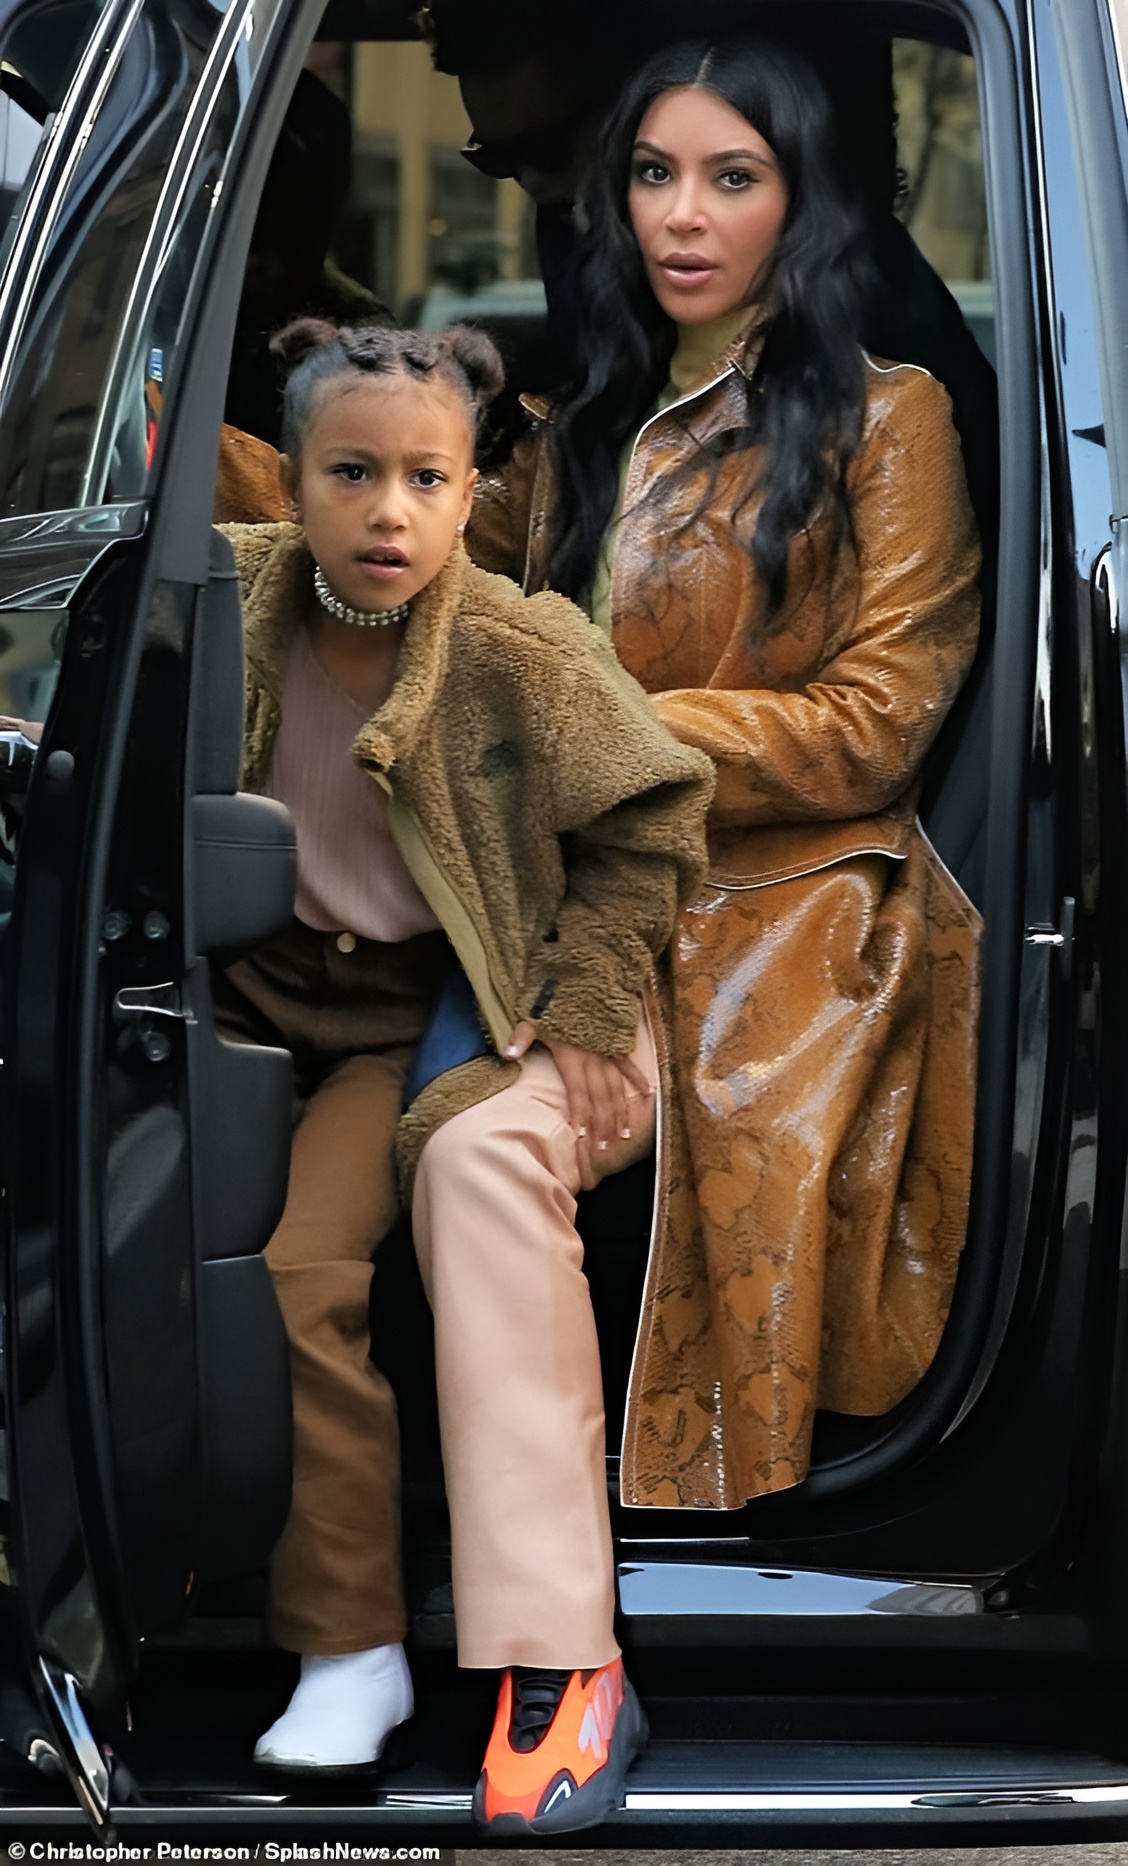 likhoa kim kardashian and north and saint celebrate thanksgiving in special outfits while shopping in san francisco 6560c0c61d590 Kim Kardashian And North And Saint Celebrate Thanksgiving In Special Outfits While Shopping In San Francisco